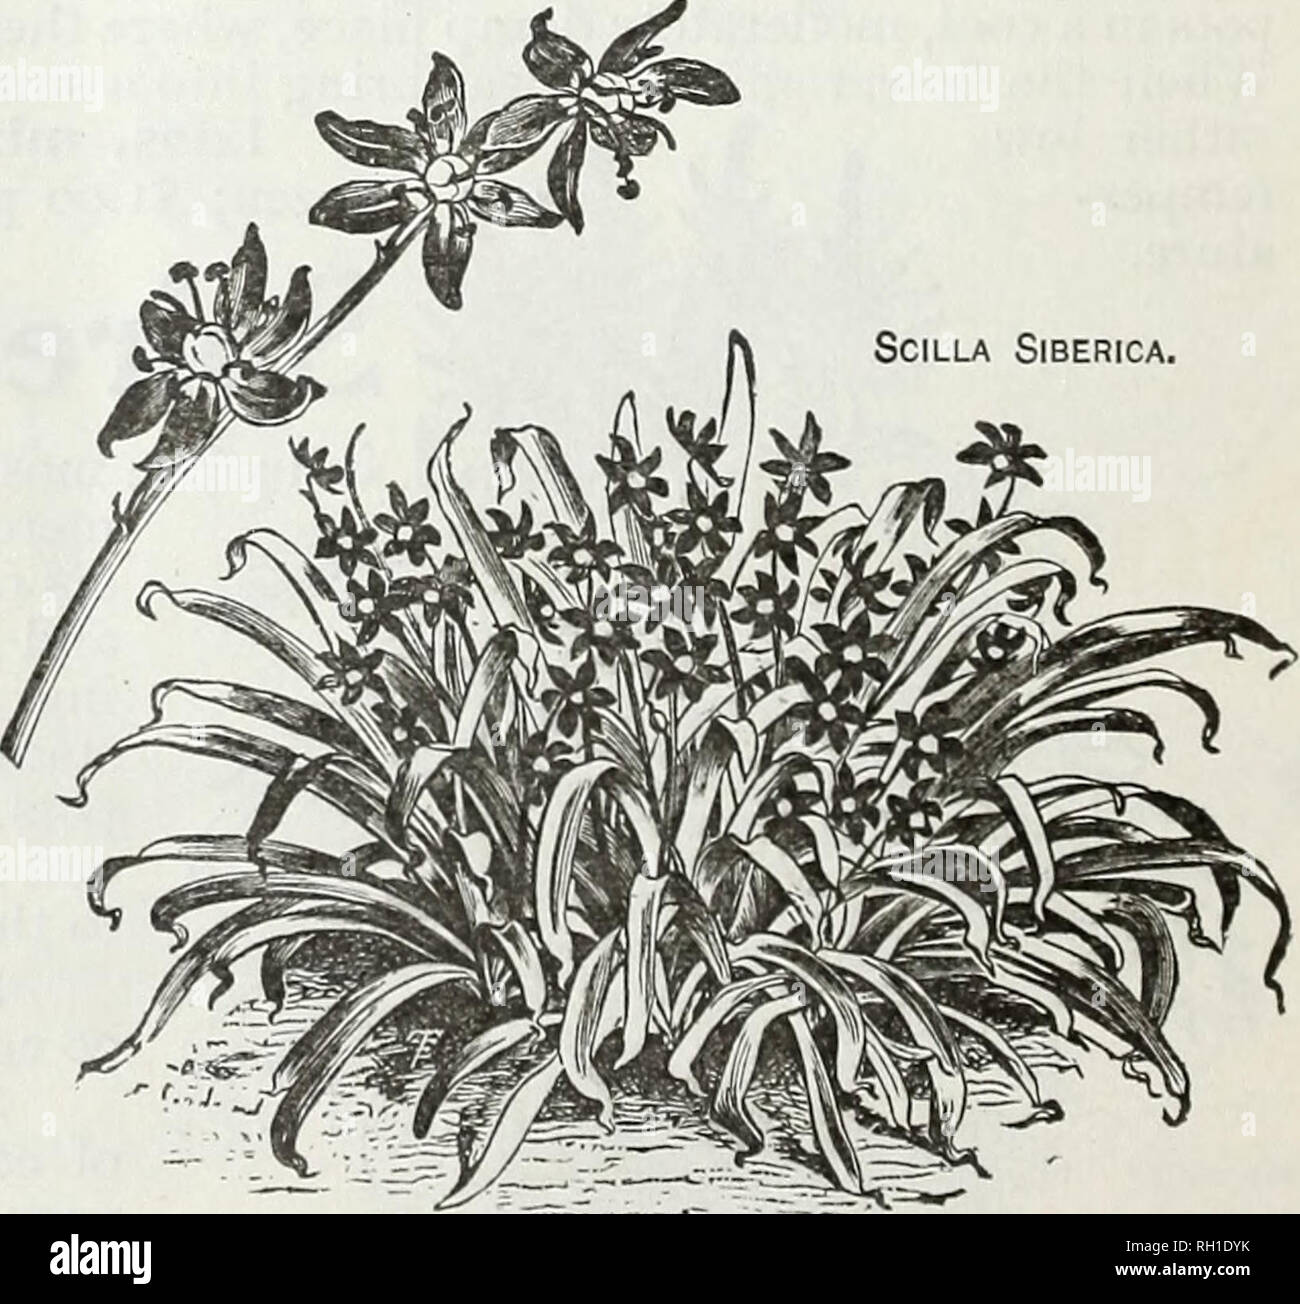 . Bulbs and seeds : autumn 1905. Seeds Catalogs; Bulbs (Plants) Catalogs; Vegetables Seeds Catalogs. ),^ ^^^ 1 â¢ Admirably adapted to house â¢â â ^â ' ' â B &quot;V&quot; C^ I 1 ^ culture, and nothing is prettier ^-^ -^^- *^ â *â â¢*â *^ for window plants, as they flower freely, are in bloom a long time, and are remark- ably free from insects. The flowers are of various shades of yellow, pink, red and white and are often very fra- grant. Plant in pots, six or eight bulbs in a pot, and cover about one inch deep. each. doz. Oxalis Multiflora Alba, white $0.03 $0.30 (^ 1^ ^ &quot; Bowii, clear  Stock Photo